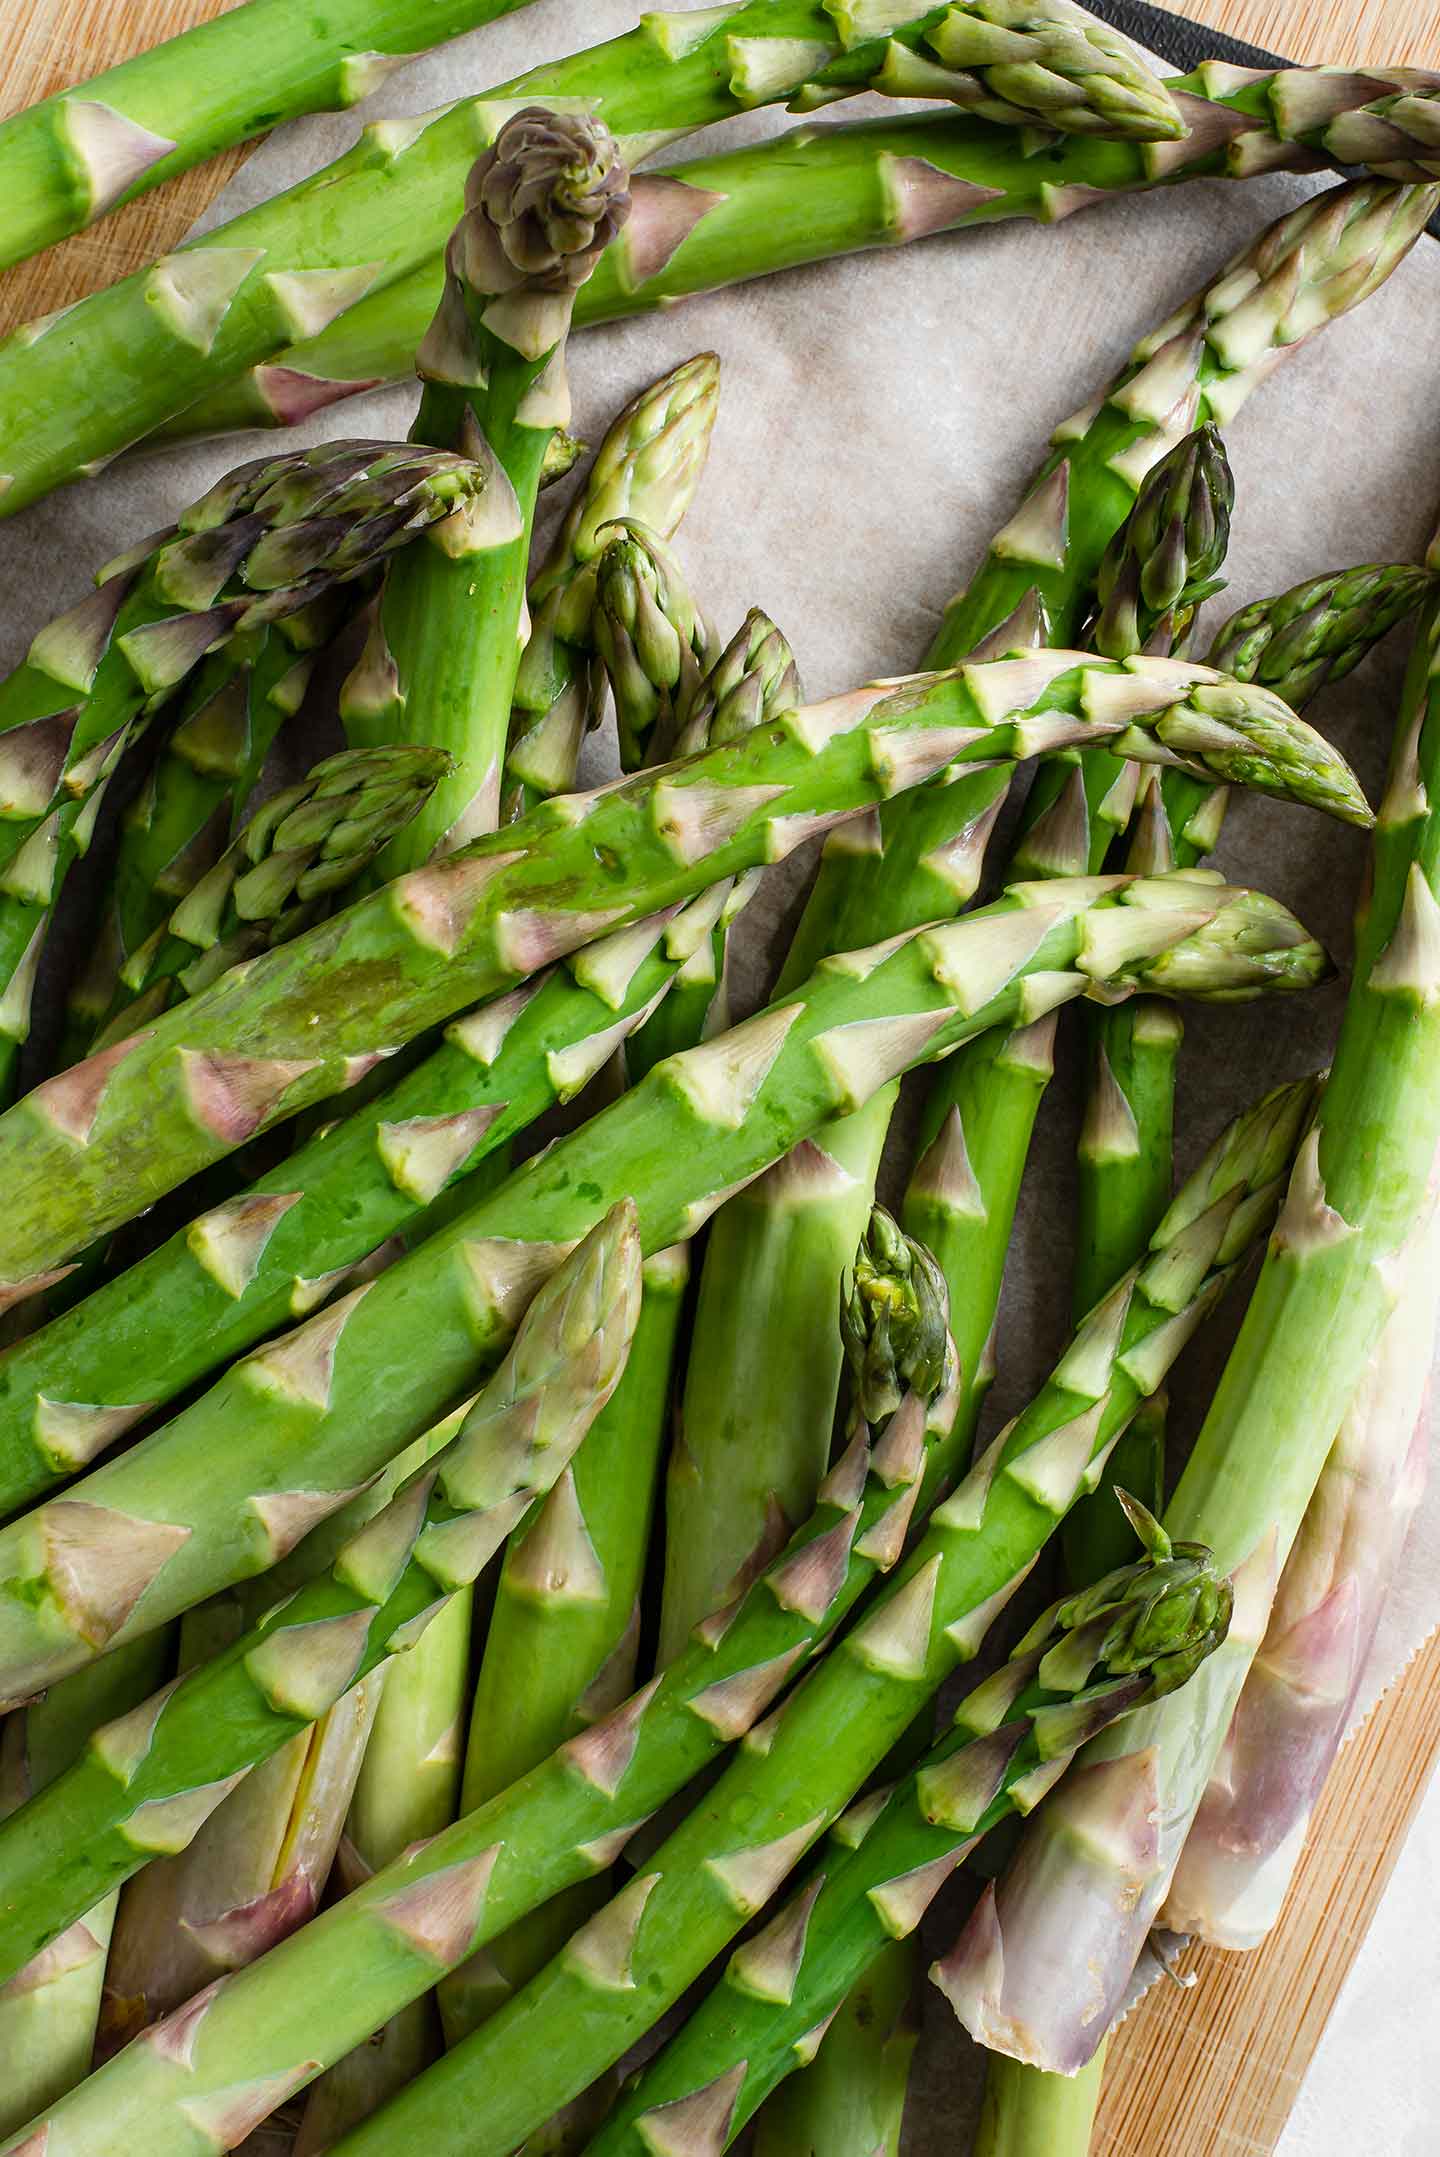 Top down view of long stalks of asparagus on a wooden tray.